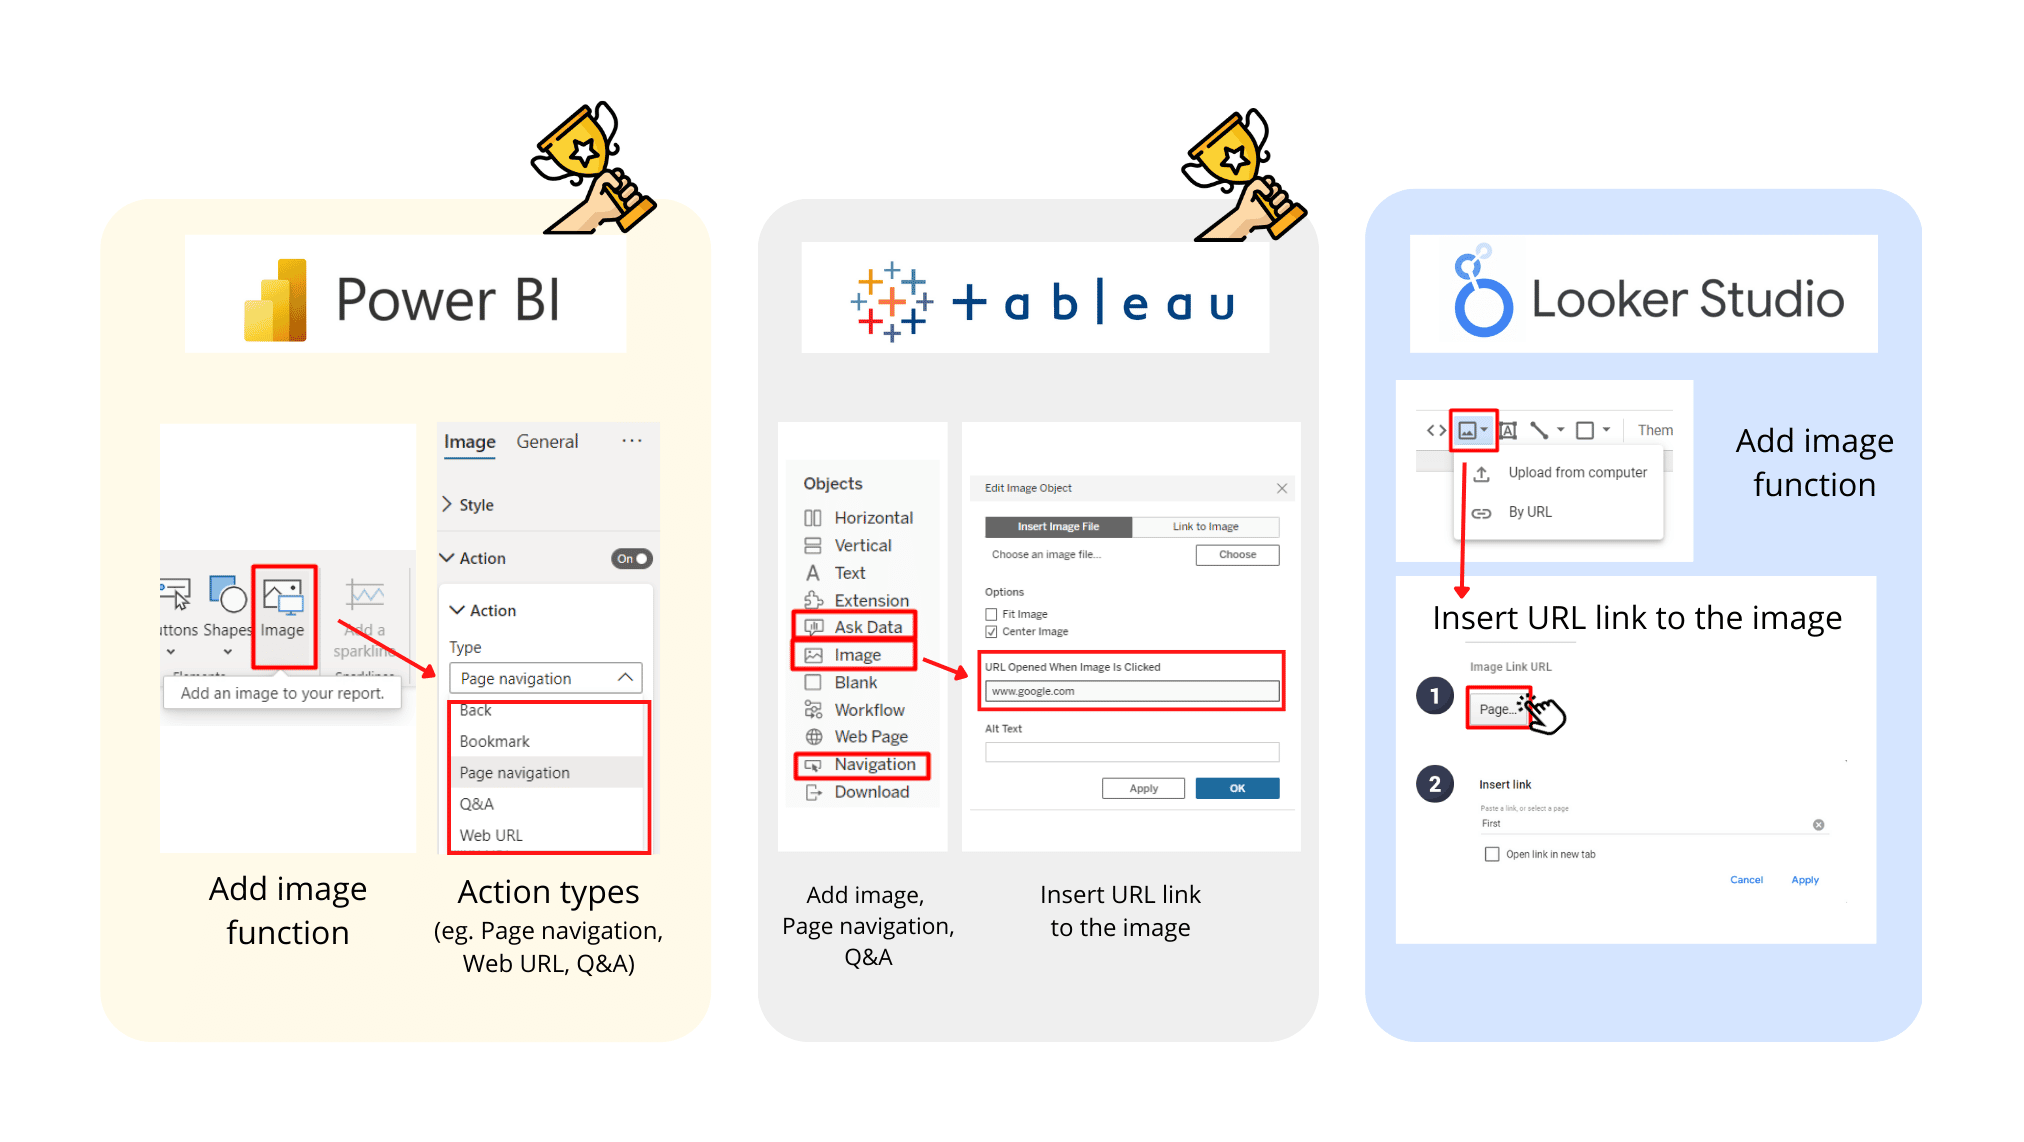 Images and icons comparison between Power BI, Tableau and Looker Studio.